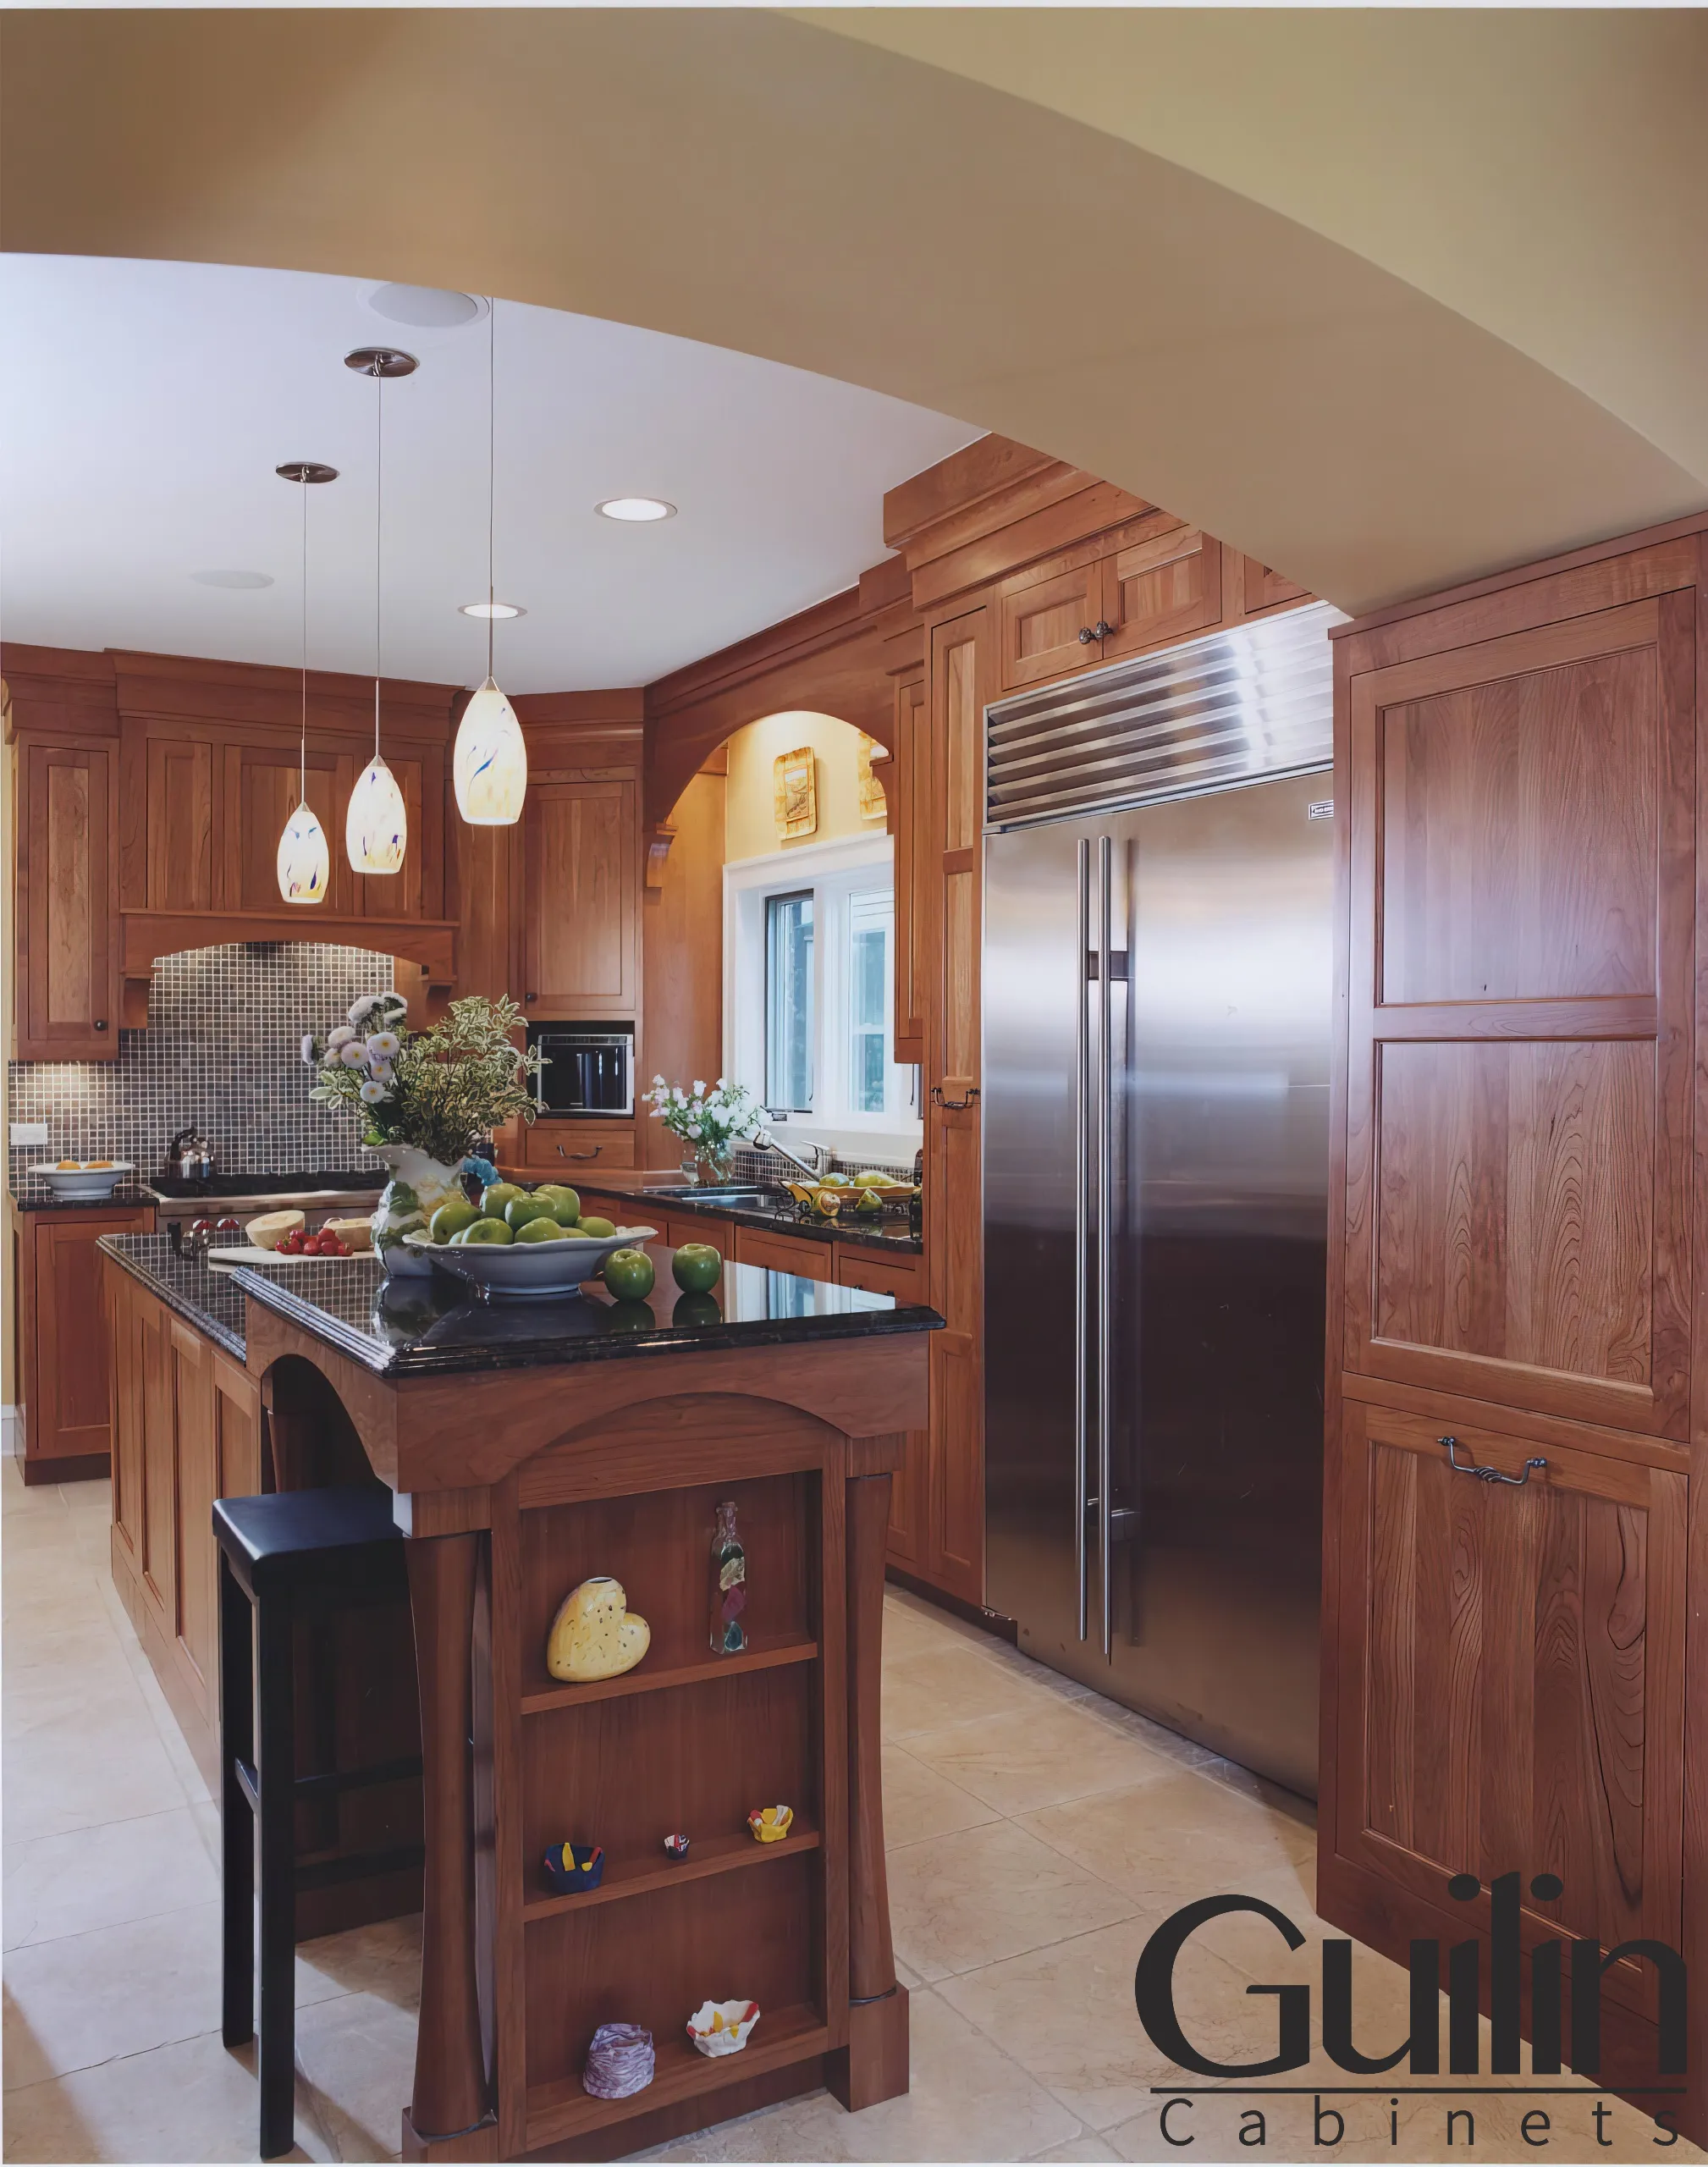 With High-quality solid wood cabinets, that can significantly increase the resale value of your home